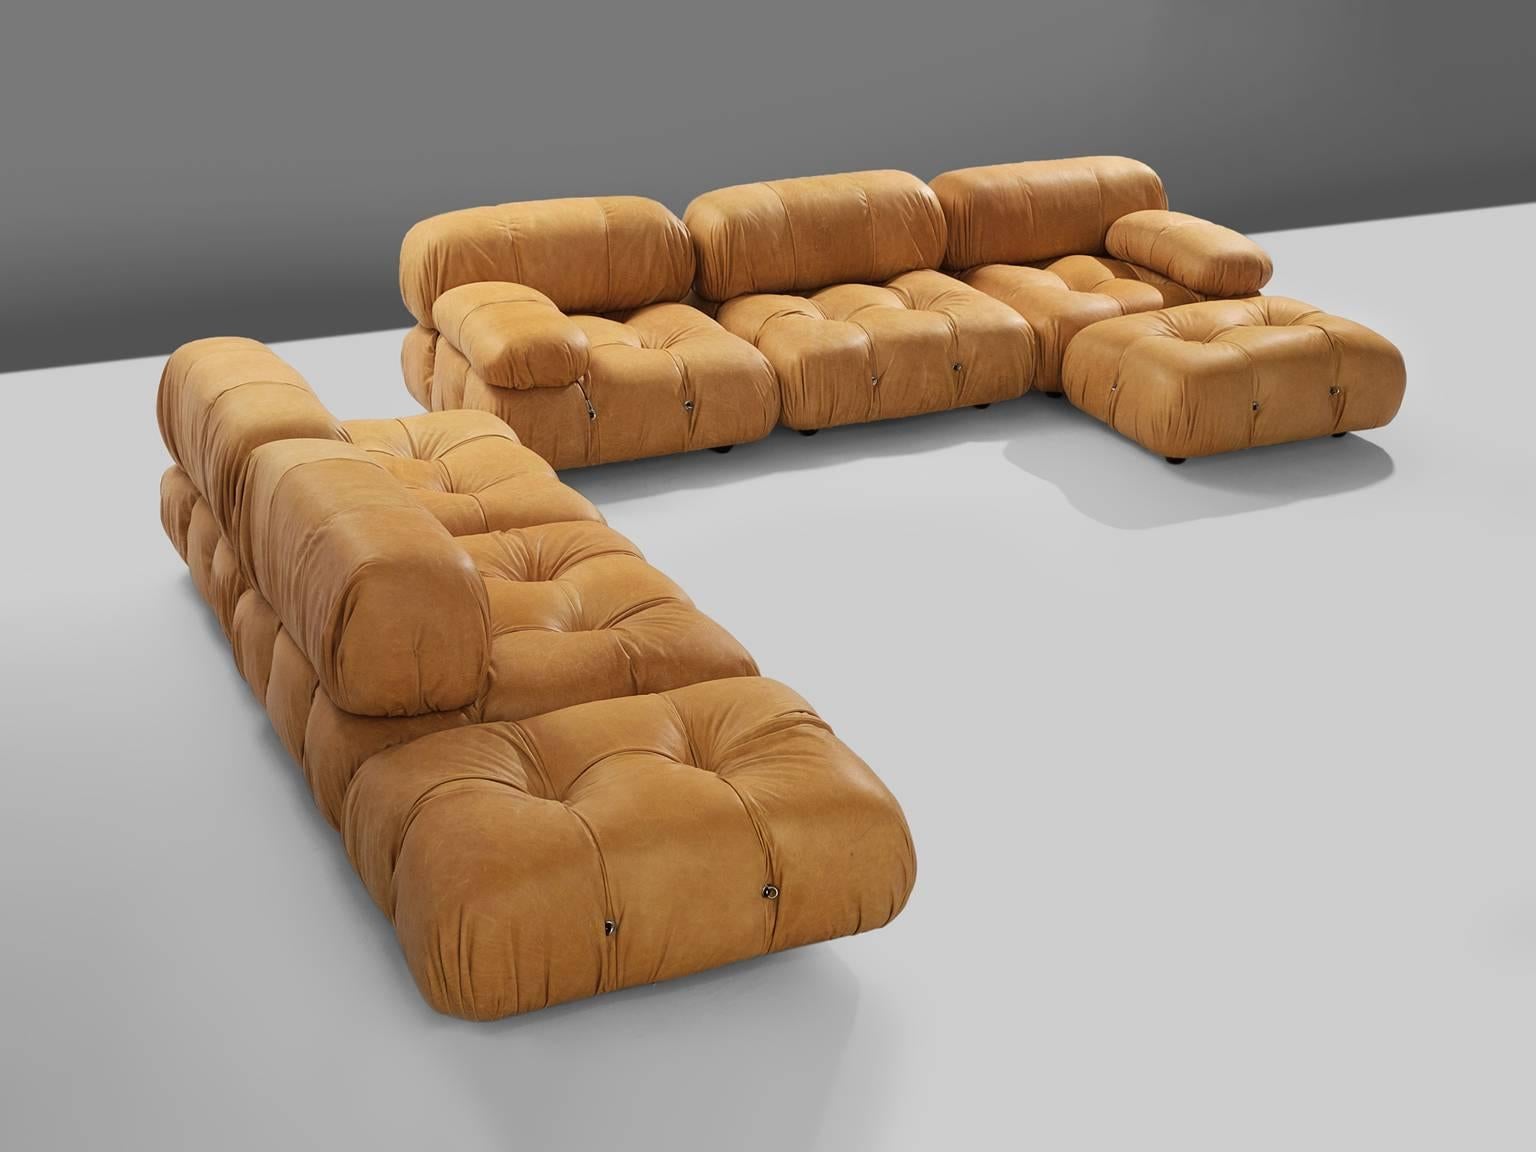 Mario Bellini, large modular 'Cameleonda' sofa, cognac leather upholstery, Italy, 1971, reupholstered by our in-house upholstery atelier. 

The sectional elements this sofa was made with, can be used freely and apart from one another. This sofa is